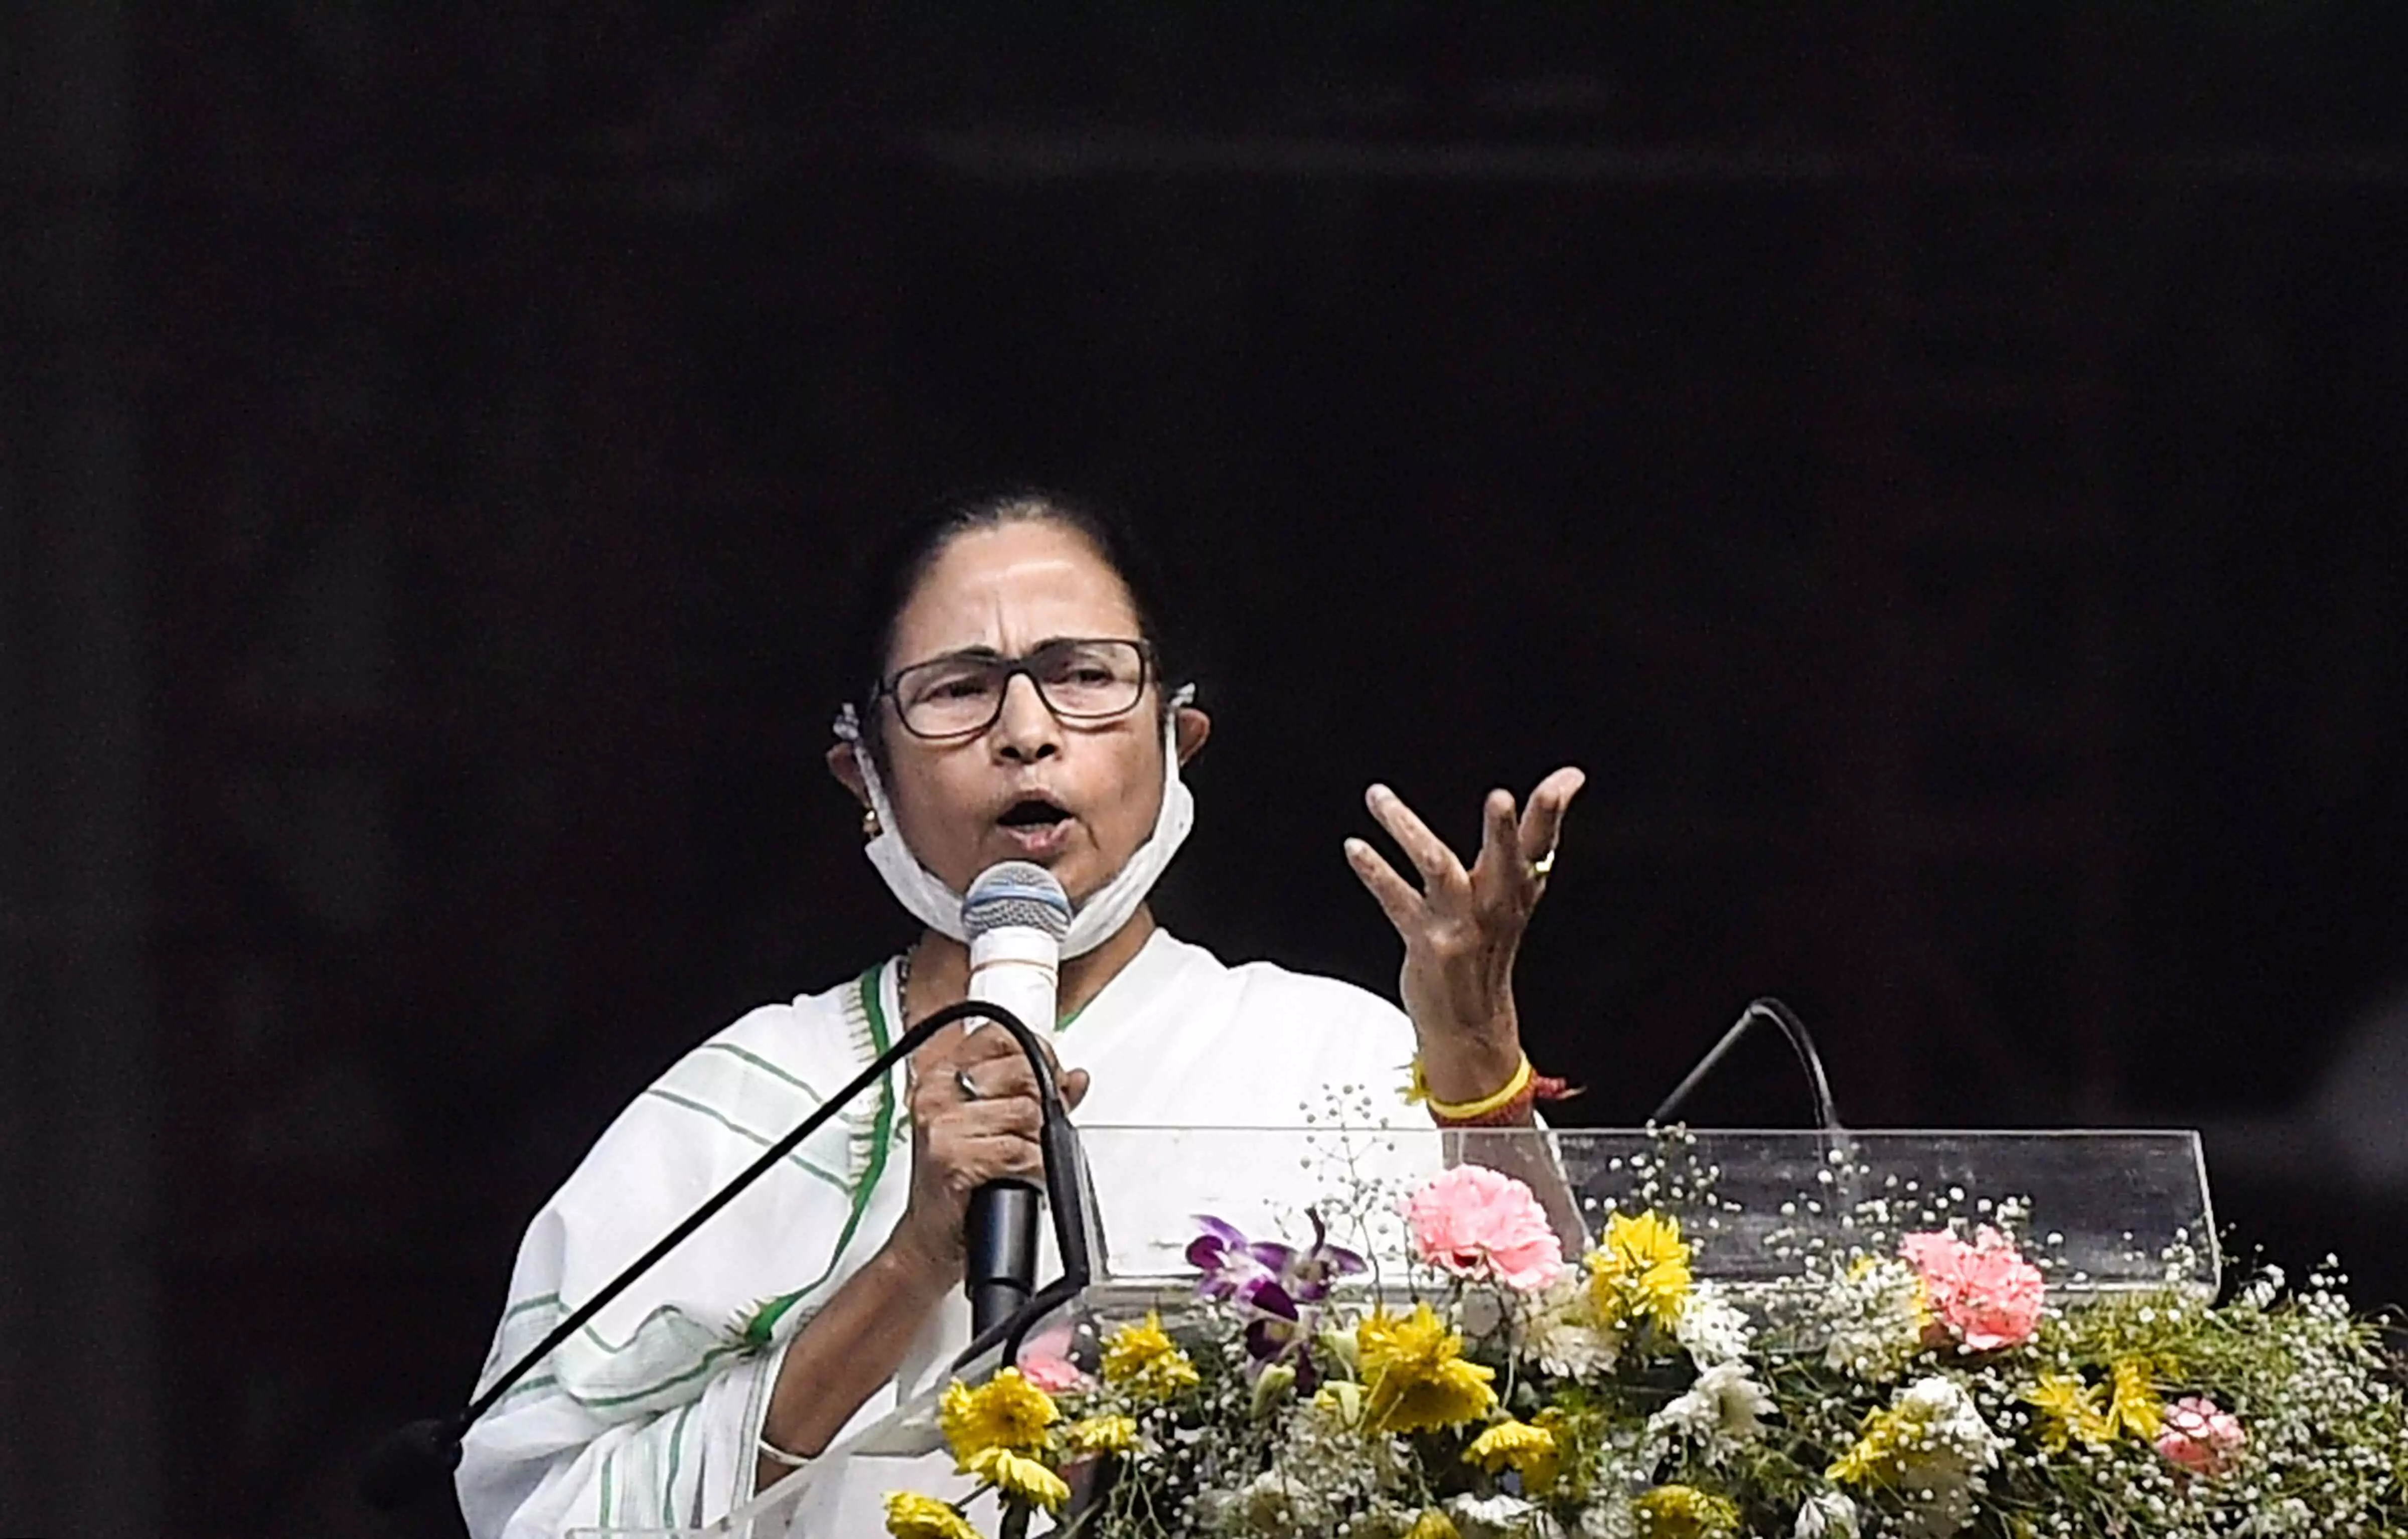 Islands renamed in Andamans just to gain popularity: Mamata